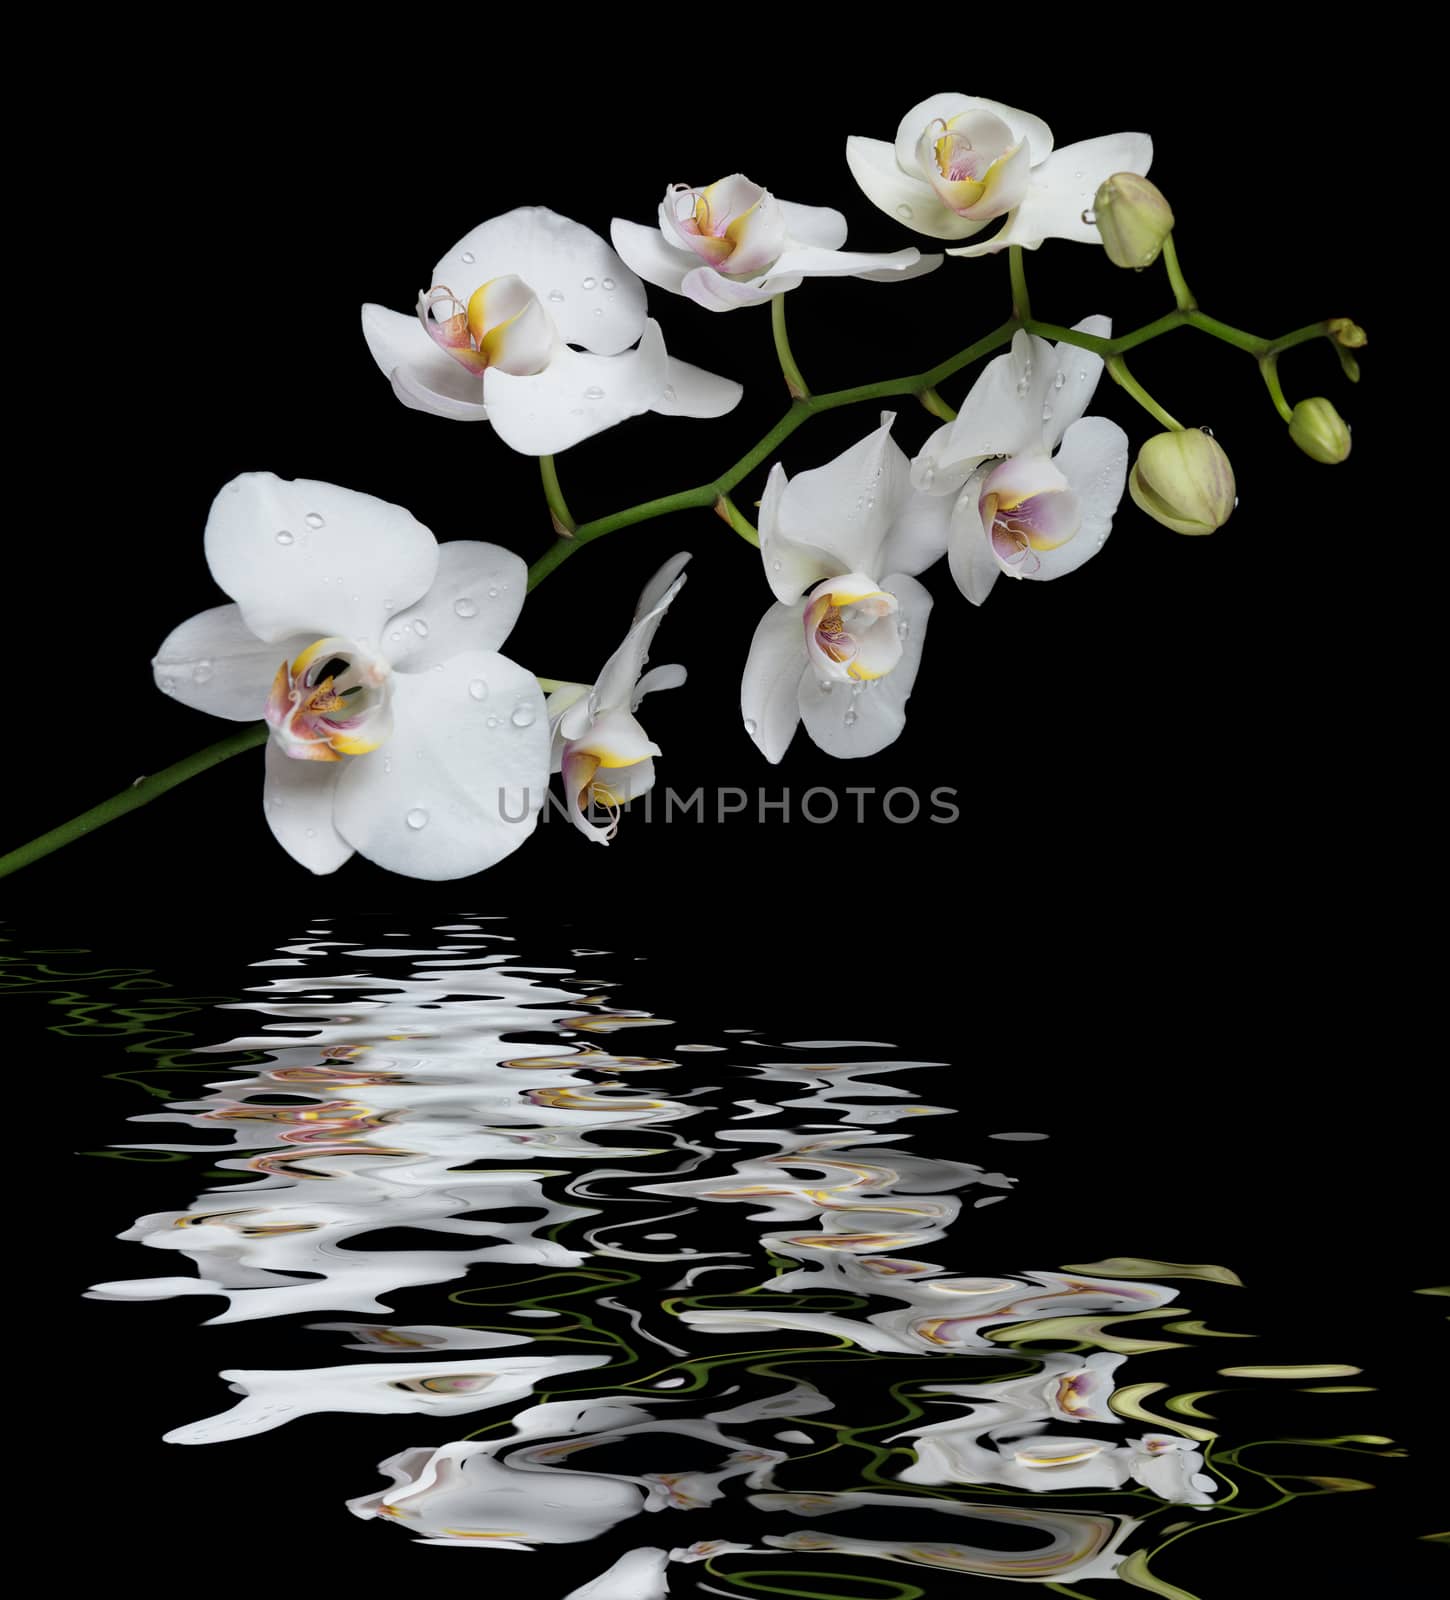 White orchid phalaenopsis flower covered with water drops, isolated on a black background reflected in a water surface with small waves